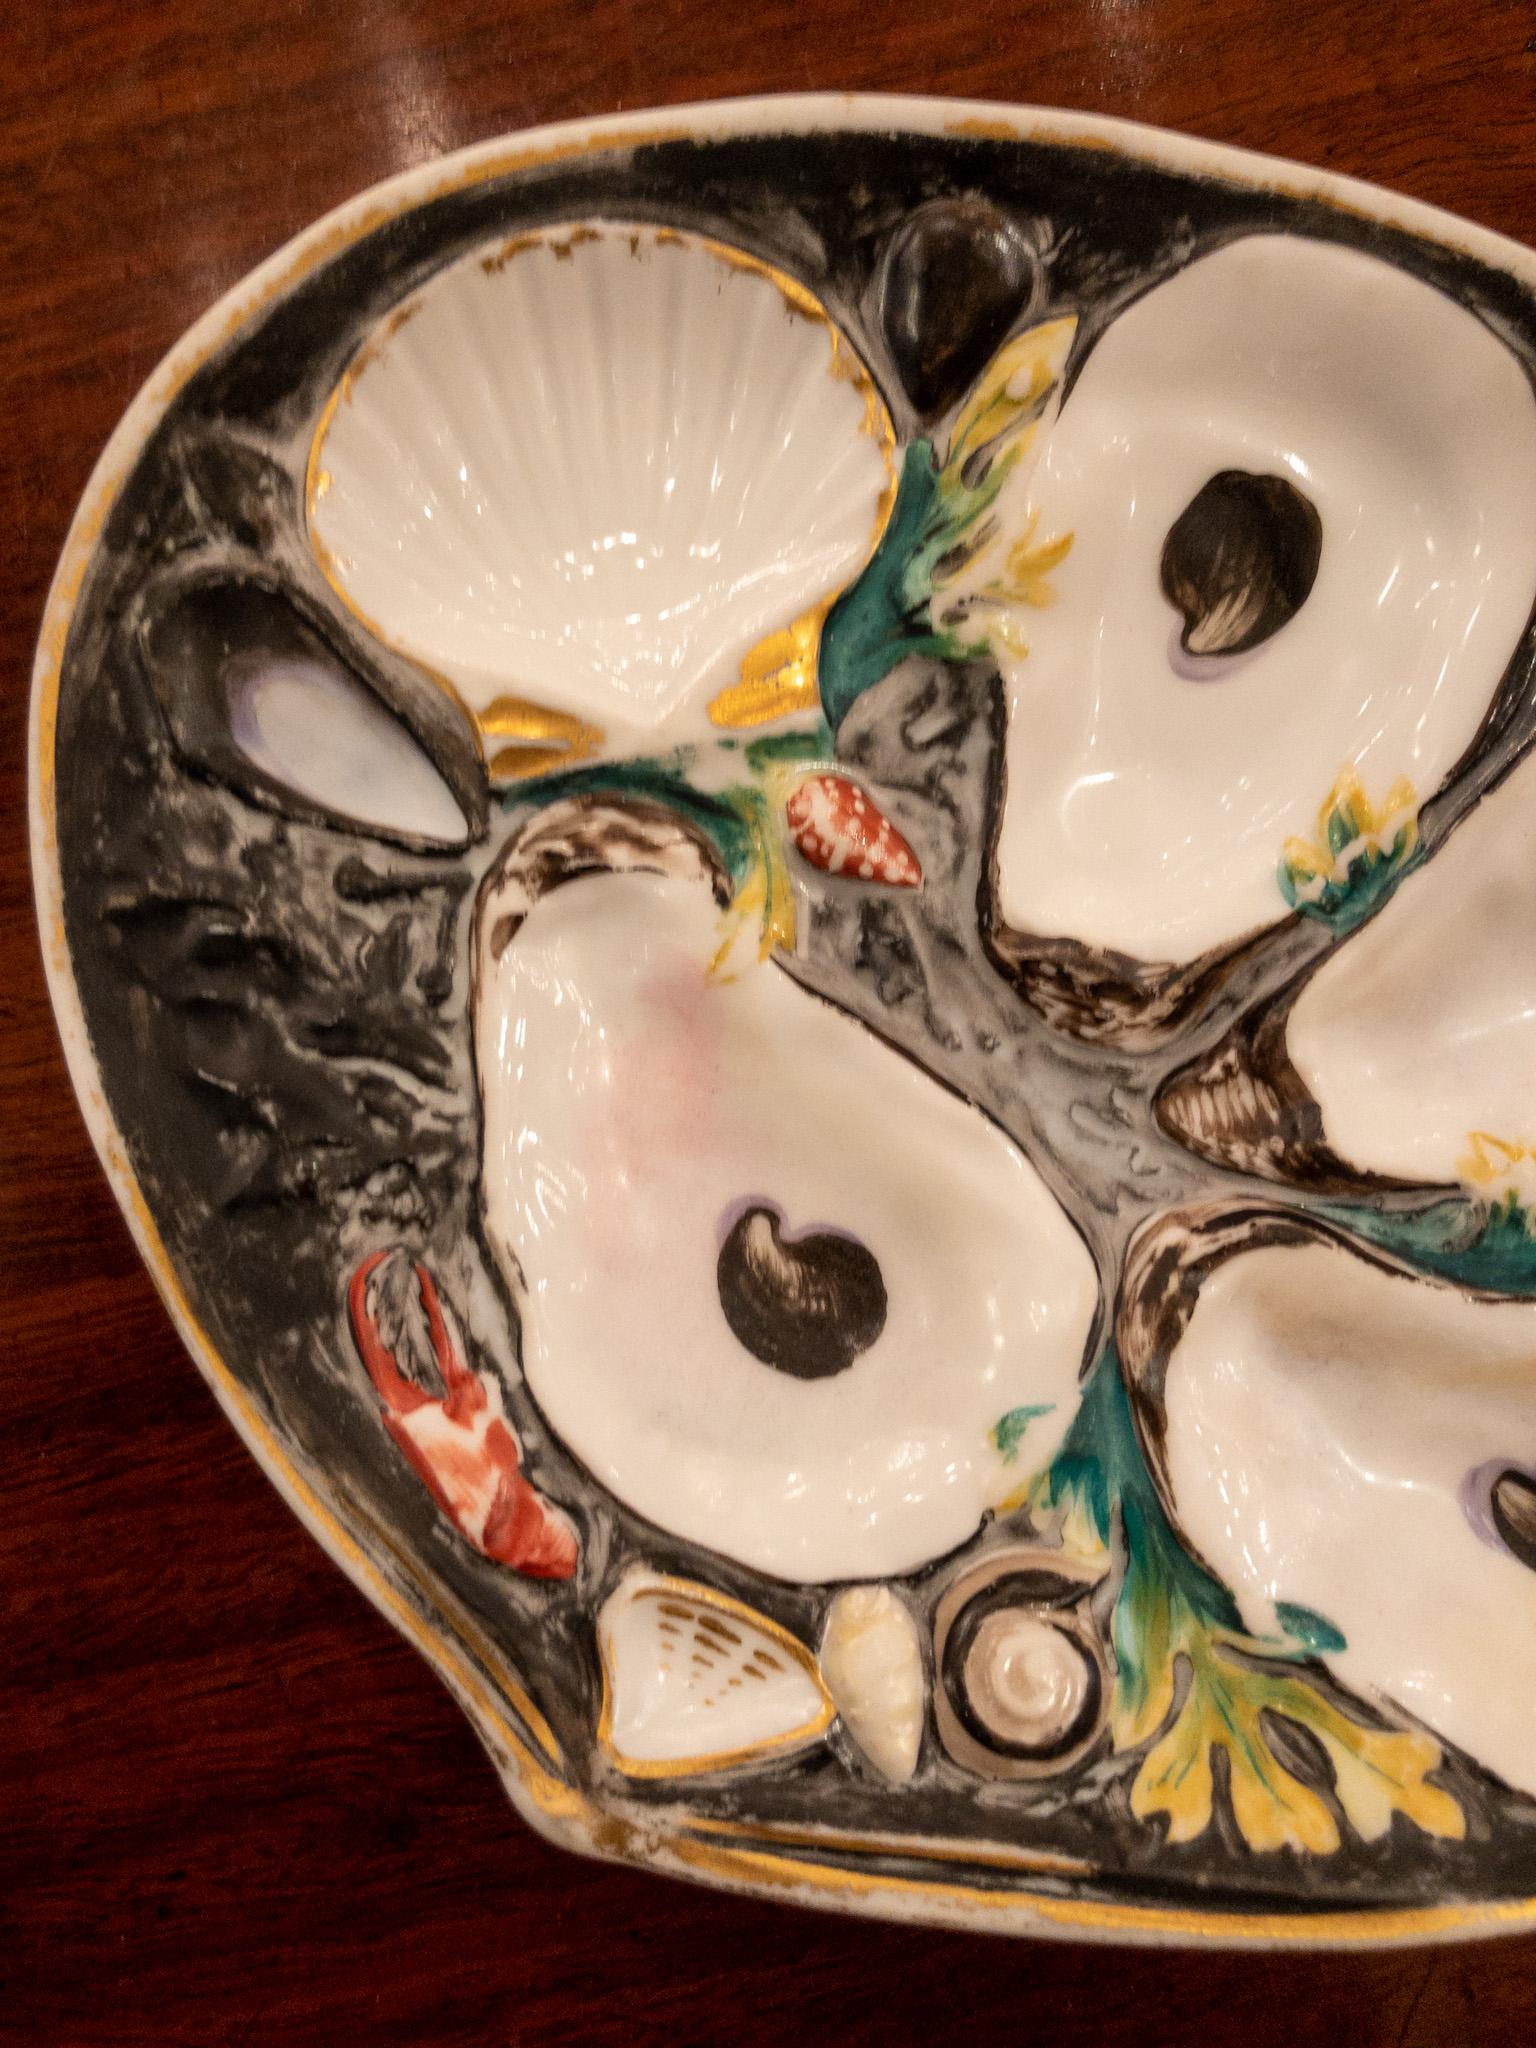 Rare antique American oyster plate signed Union Porcelain Works circa 1880, with hand painted black background.